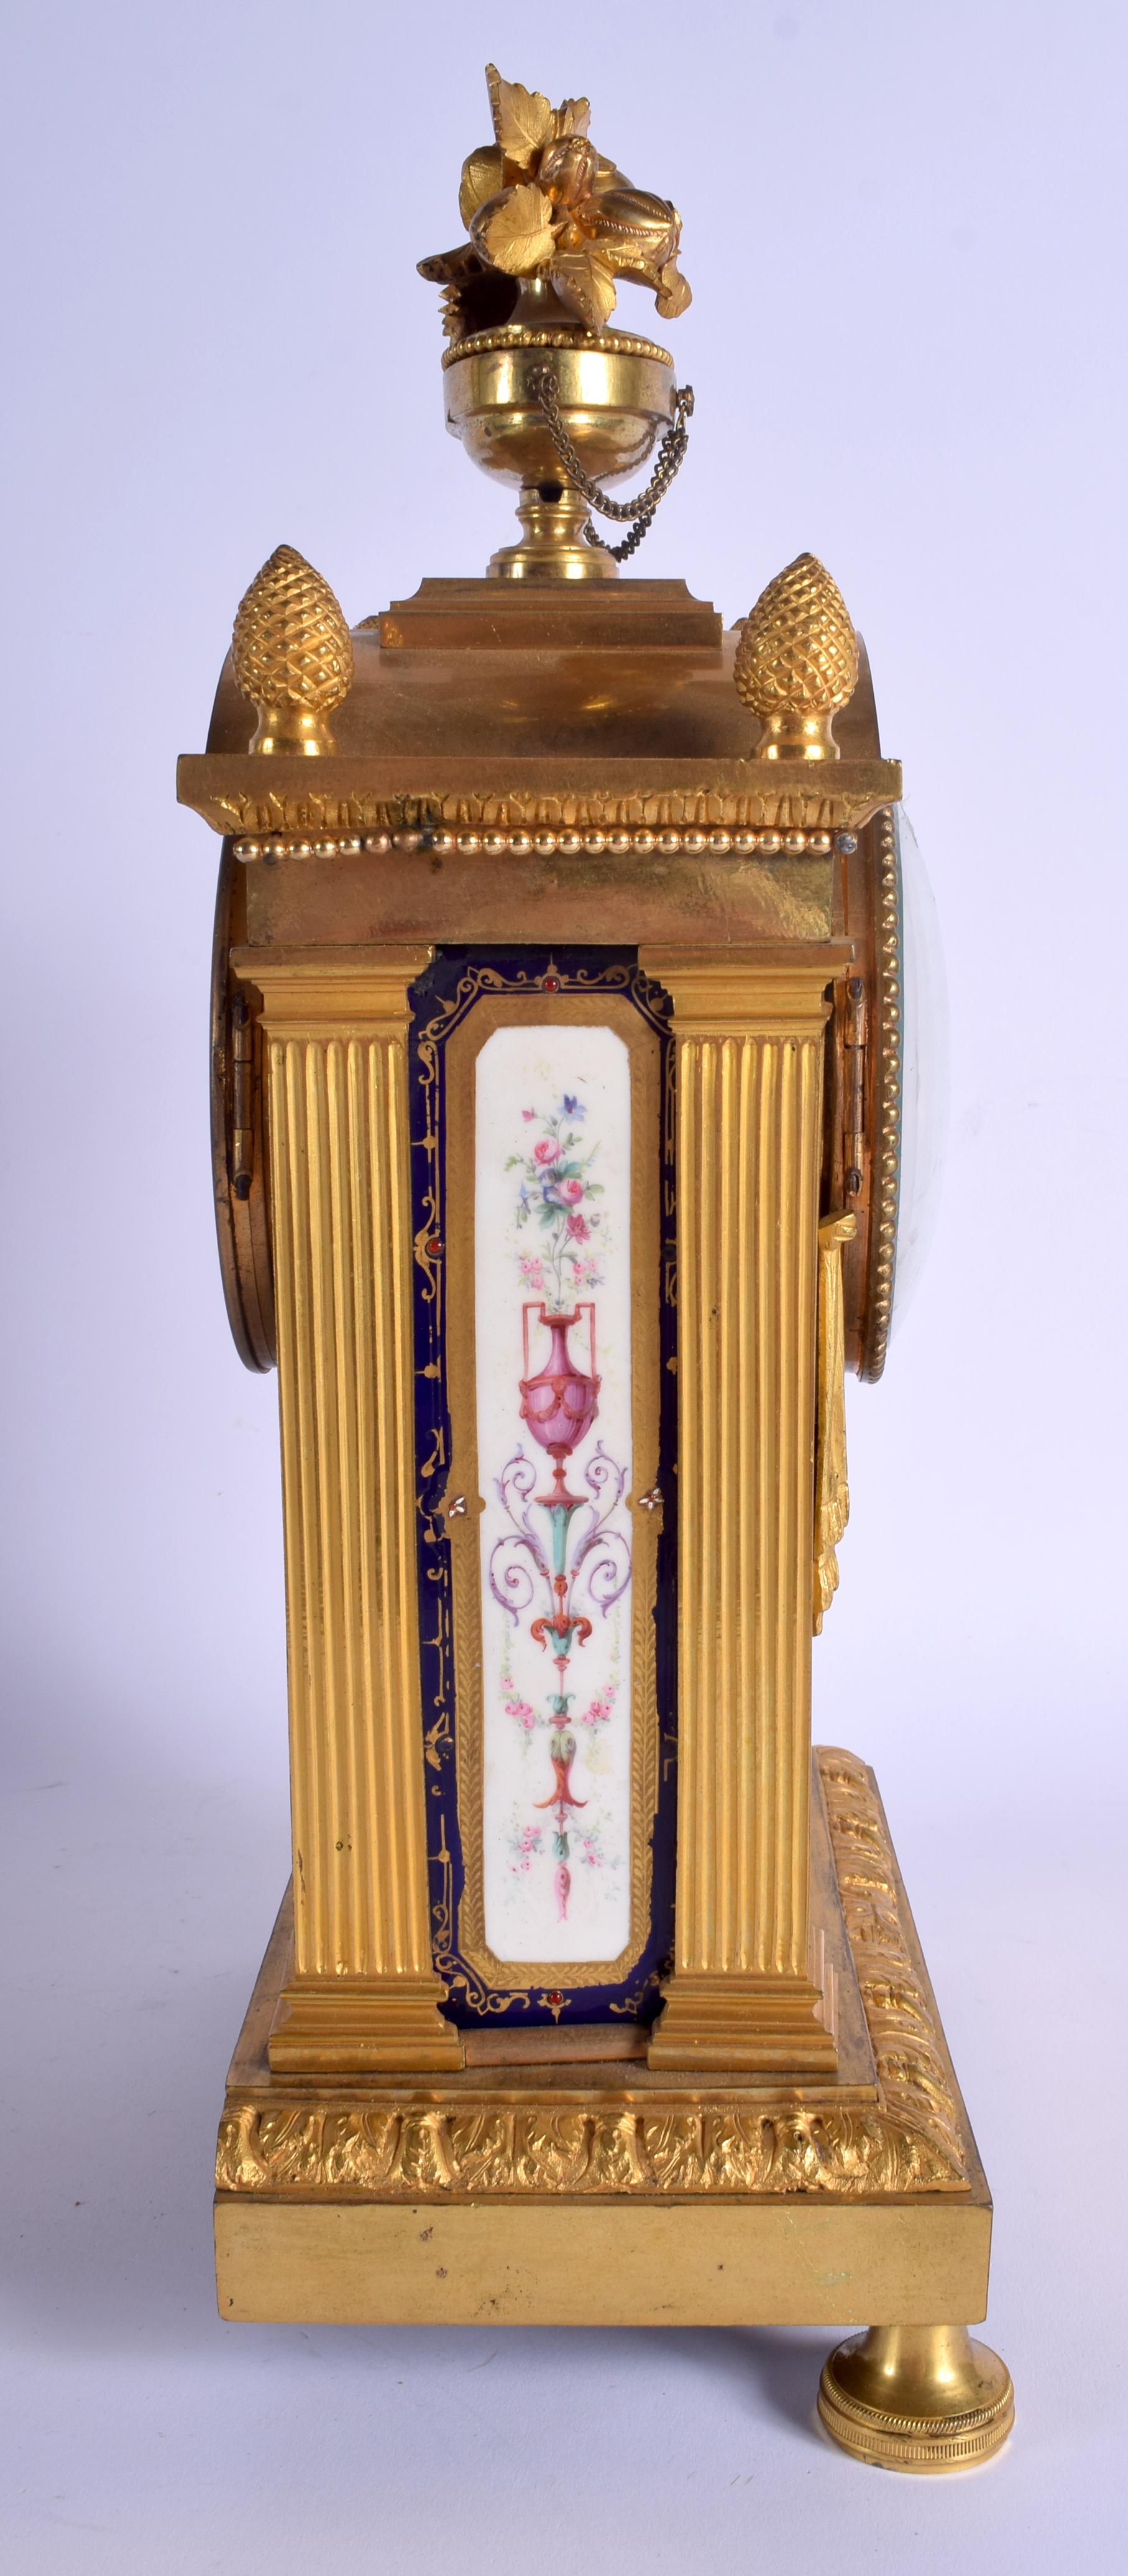 A LARGE 19TH CENTURY FRENCH SEVRES PORCELAIN AND ORMOLU MANTEL CLOCK painted with figures. 39 cm x 1 - Image 3 of 4